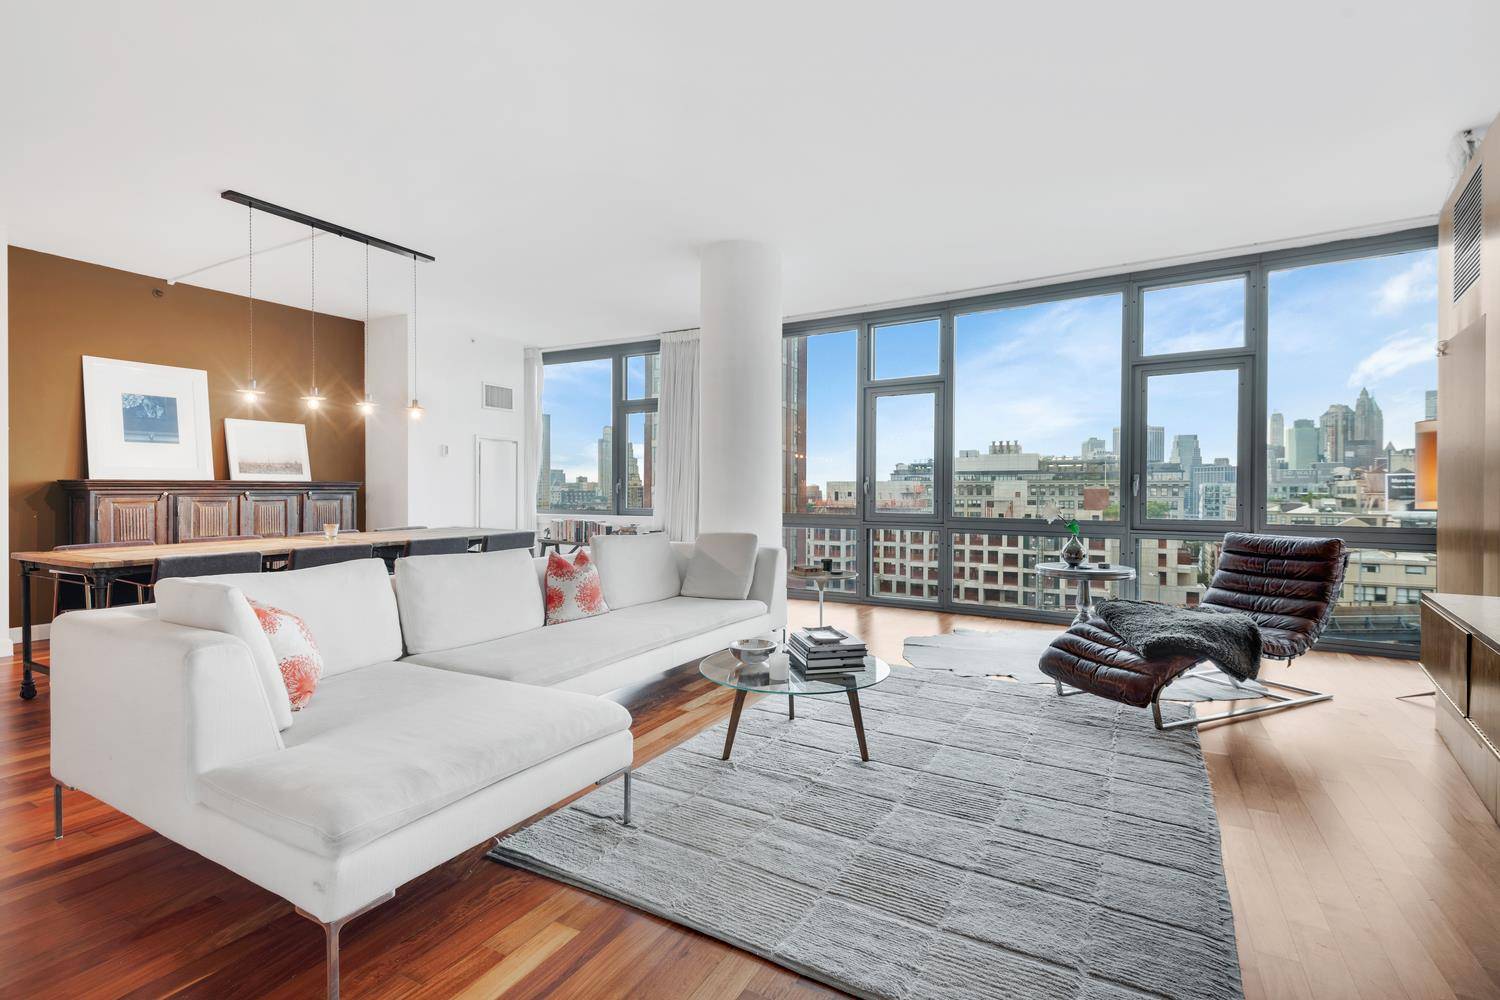 NO FEE CYOF Luxury and Views combined to make the perfect Dumbo home.